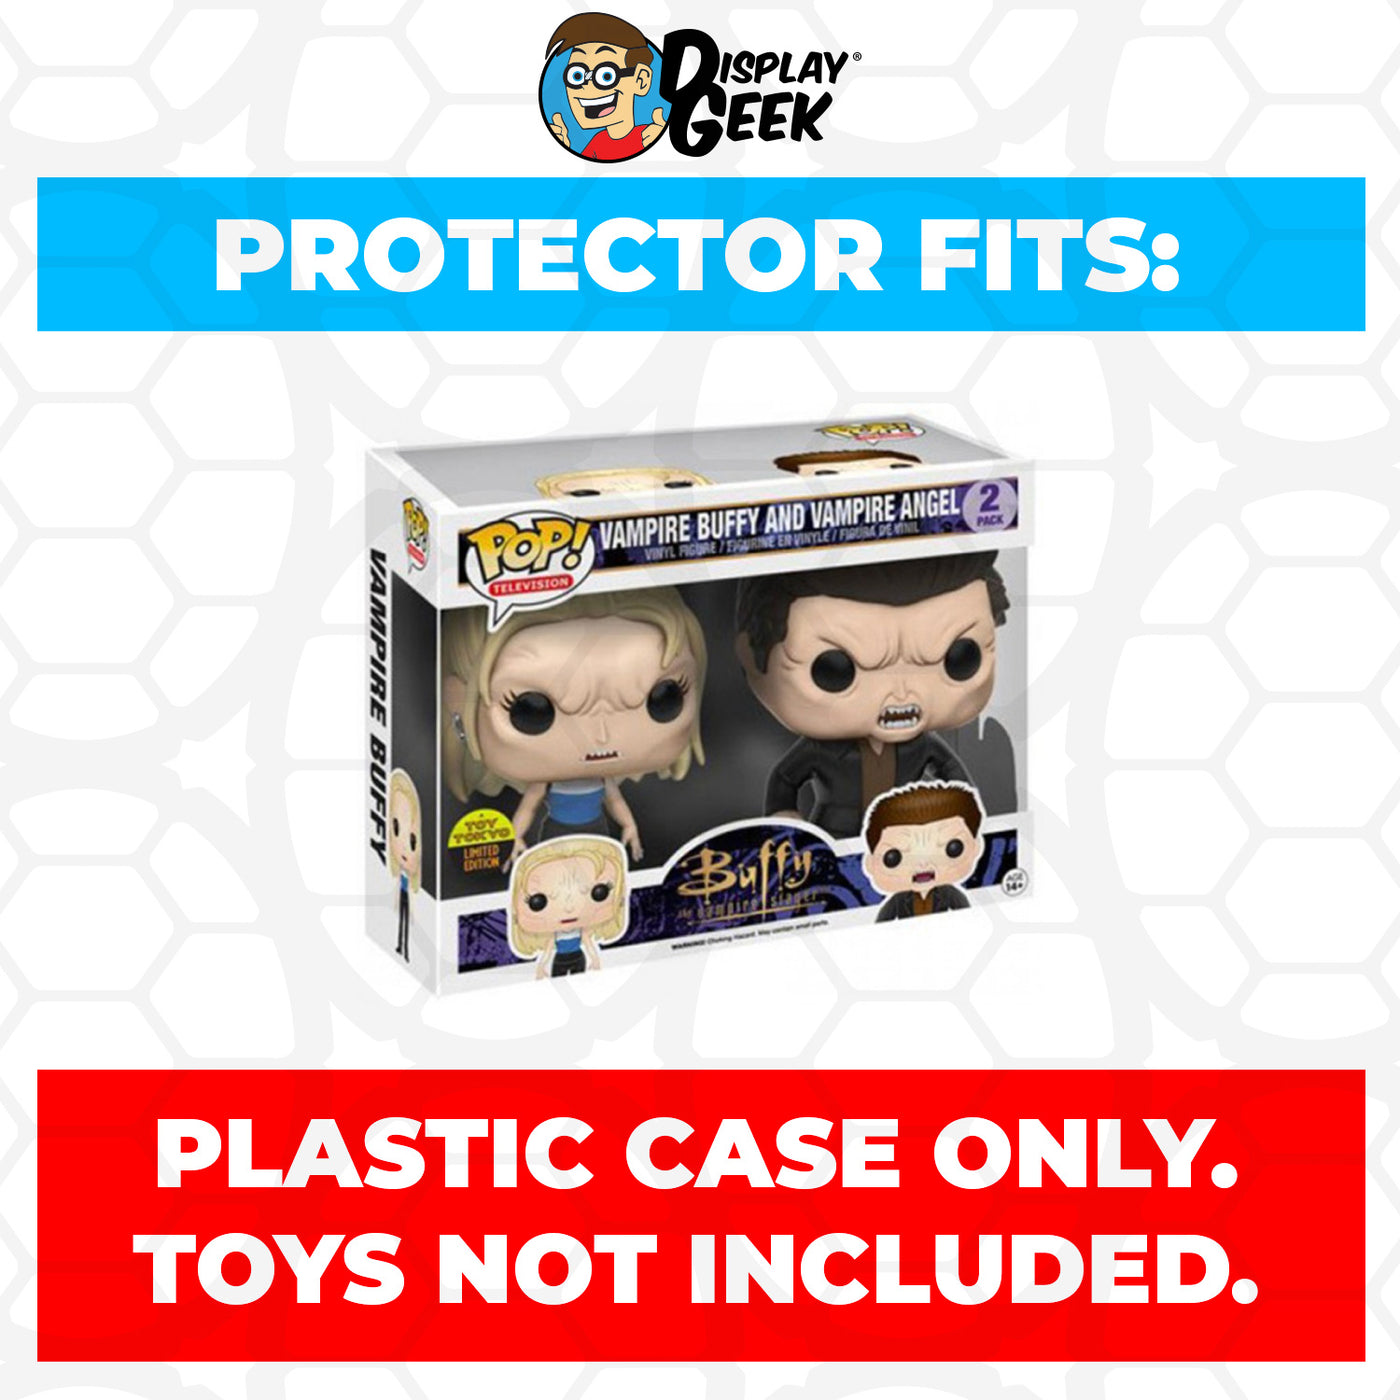 Pop Protector for 2 Pack Vampire Buffy and Vampire Angel SDCC Funko Pop on The Protector Guide App by Display Geek